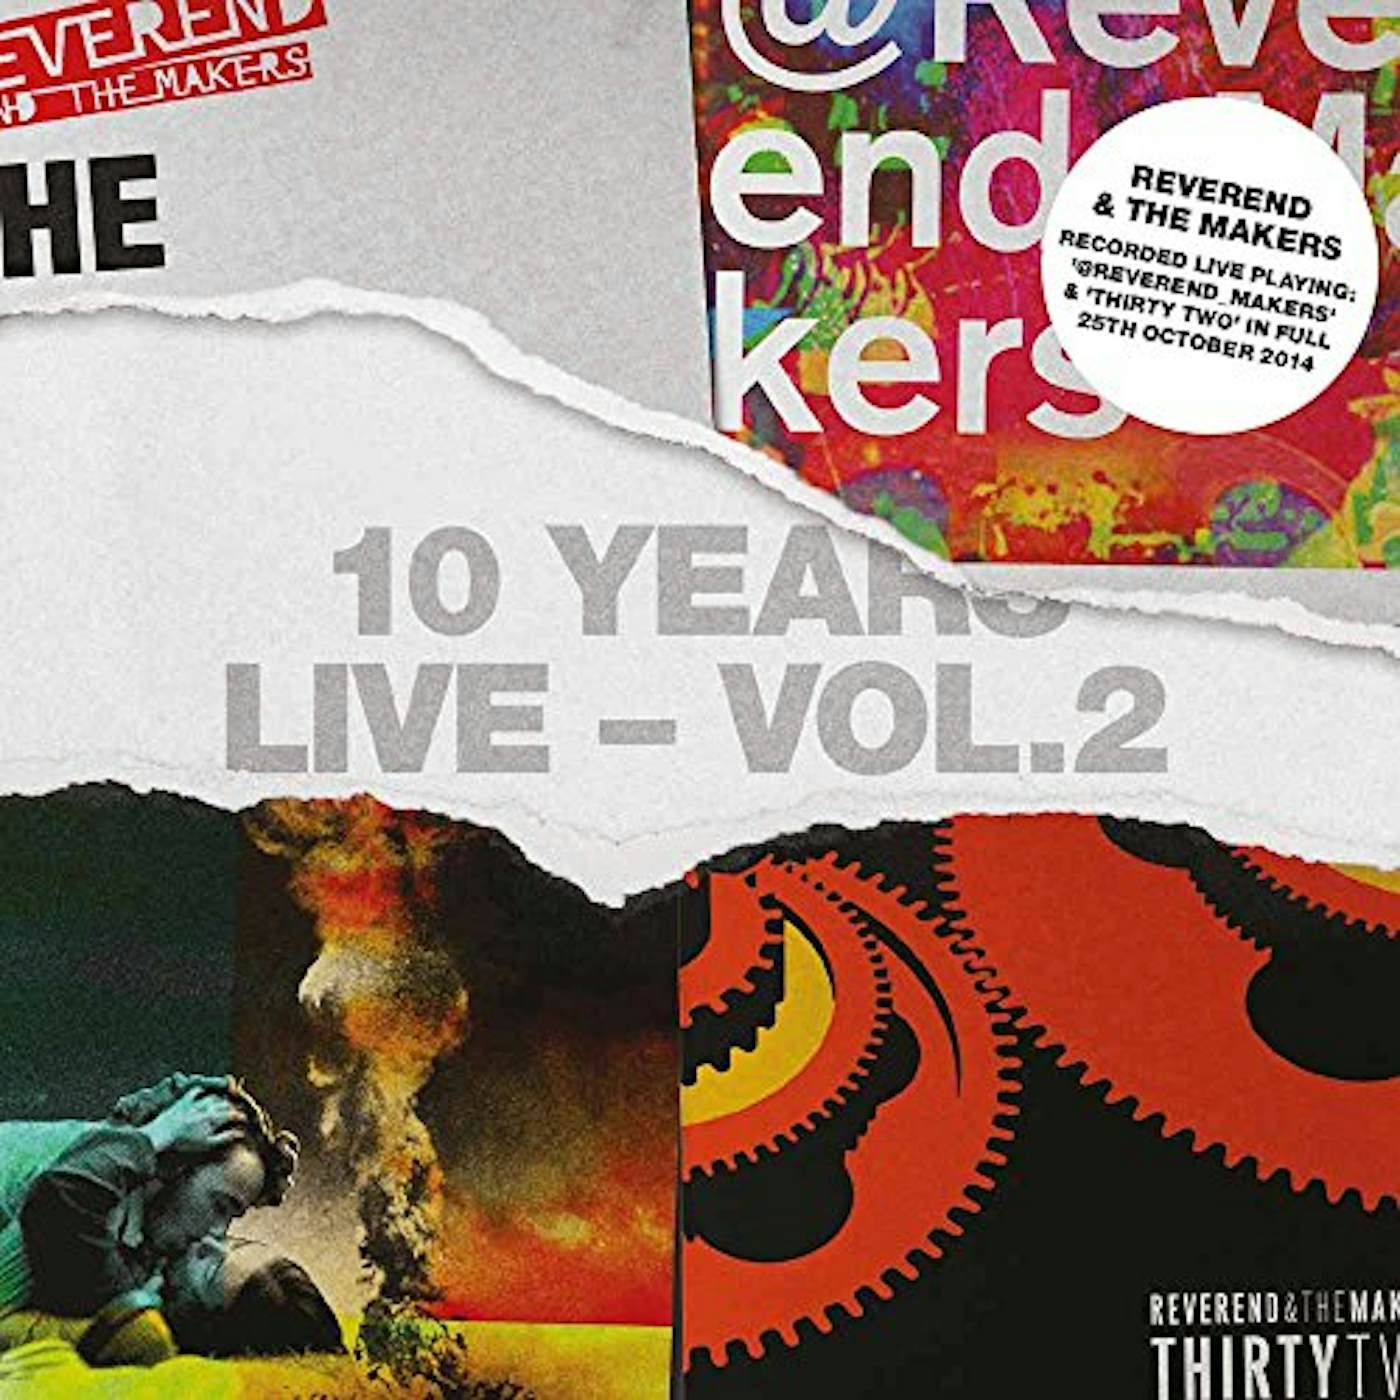 Reverend And The Makers 10 YEARS LIVE: VOL.2 CD